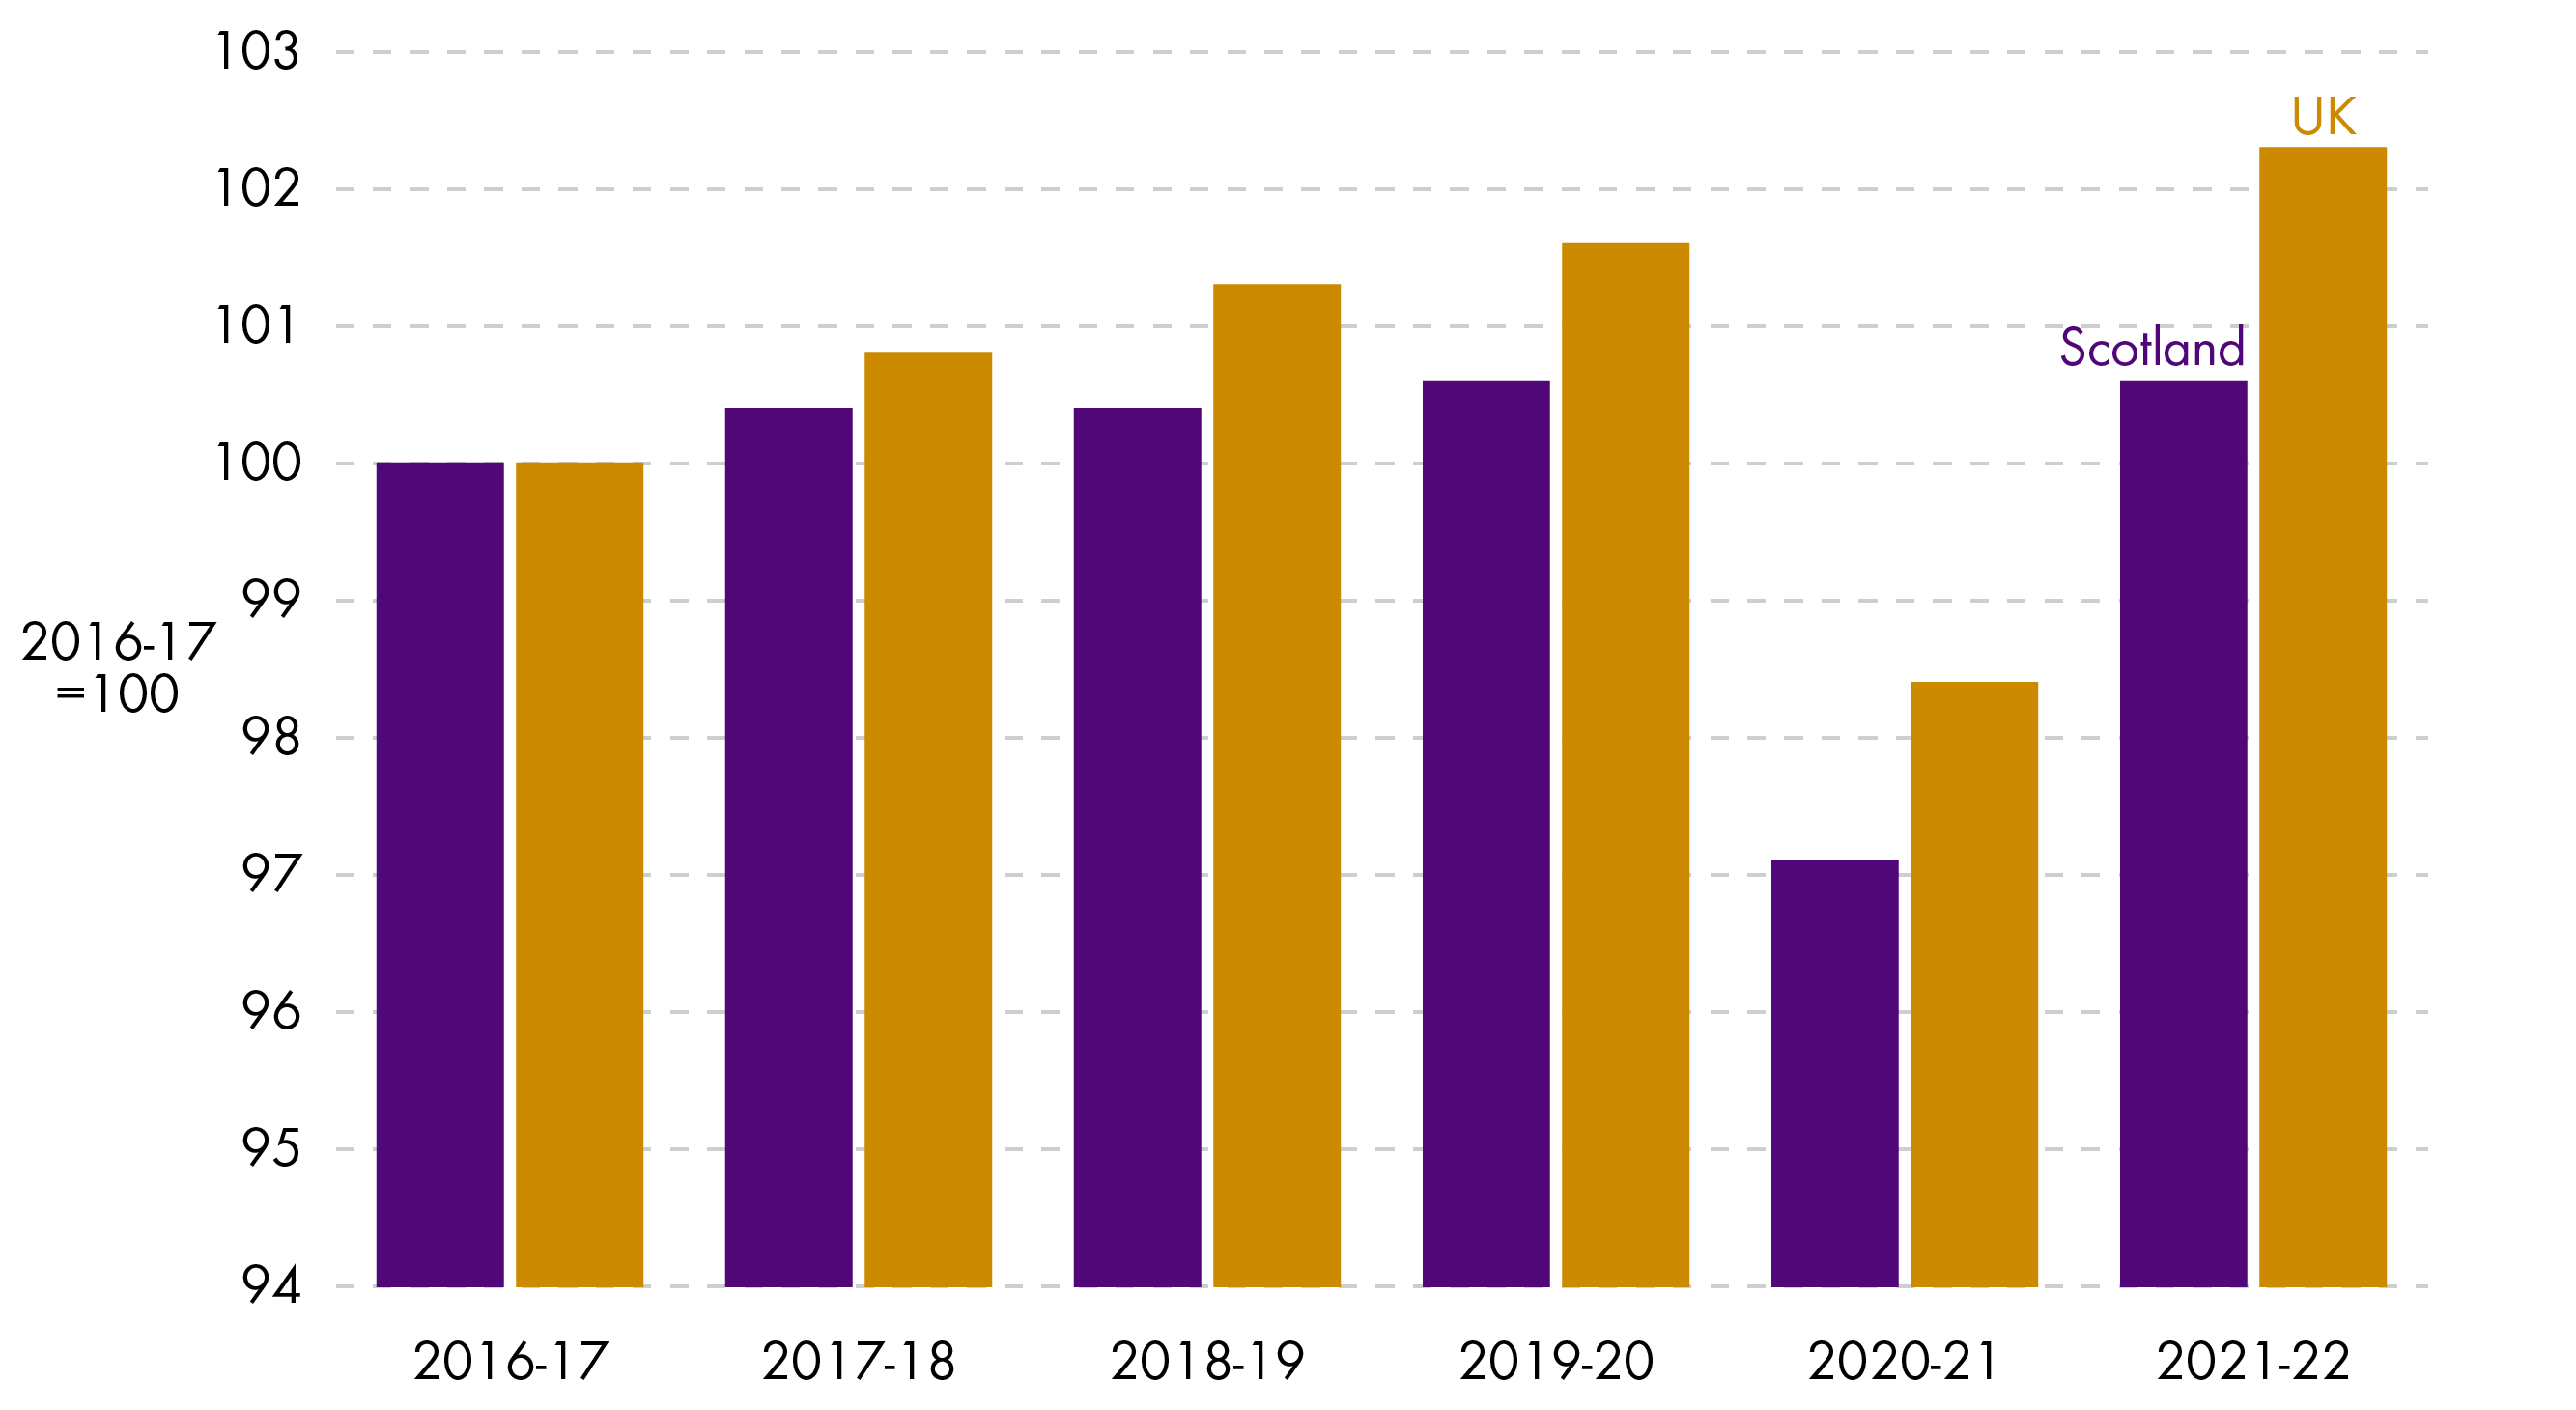 Figure 5 shows growth in payrolled employees per person in Scotland and the UK in every year from 2016-17 to 2021-22. UK growth in payrolled employees has outpaced Scottish growth in each year although both saw negative growth in 2020-21. The UK position at the end of 2021-22 is around 1.5% higher than Scotland.